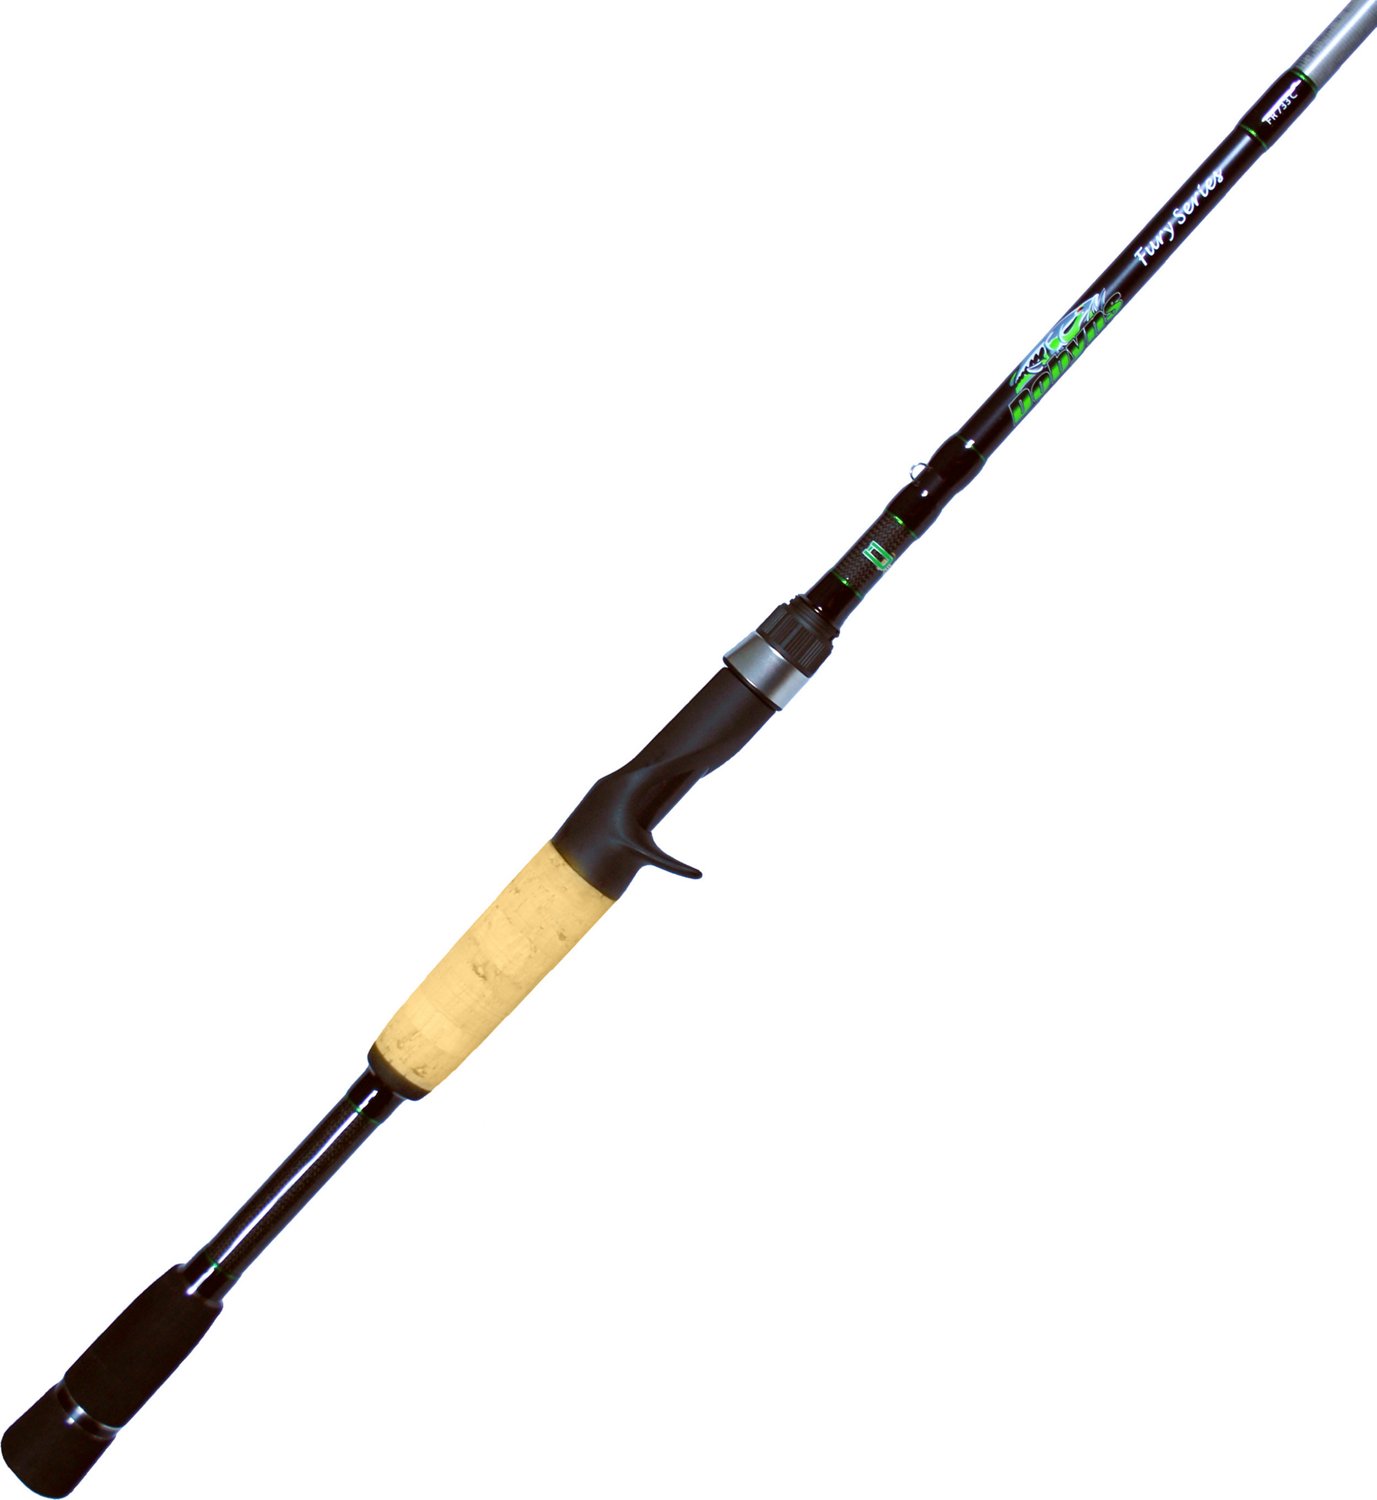 Dobyns Rods Kaden Series 7'4” Casting Bass Fishing Rod KD743C Med-Heavy  Fast Action | Modulus Graphite Blank w/Kevlar Wrapping | Fuji Reel Seats 